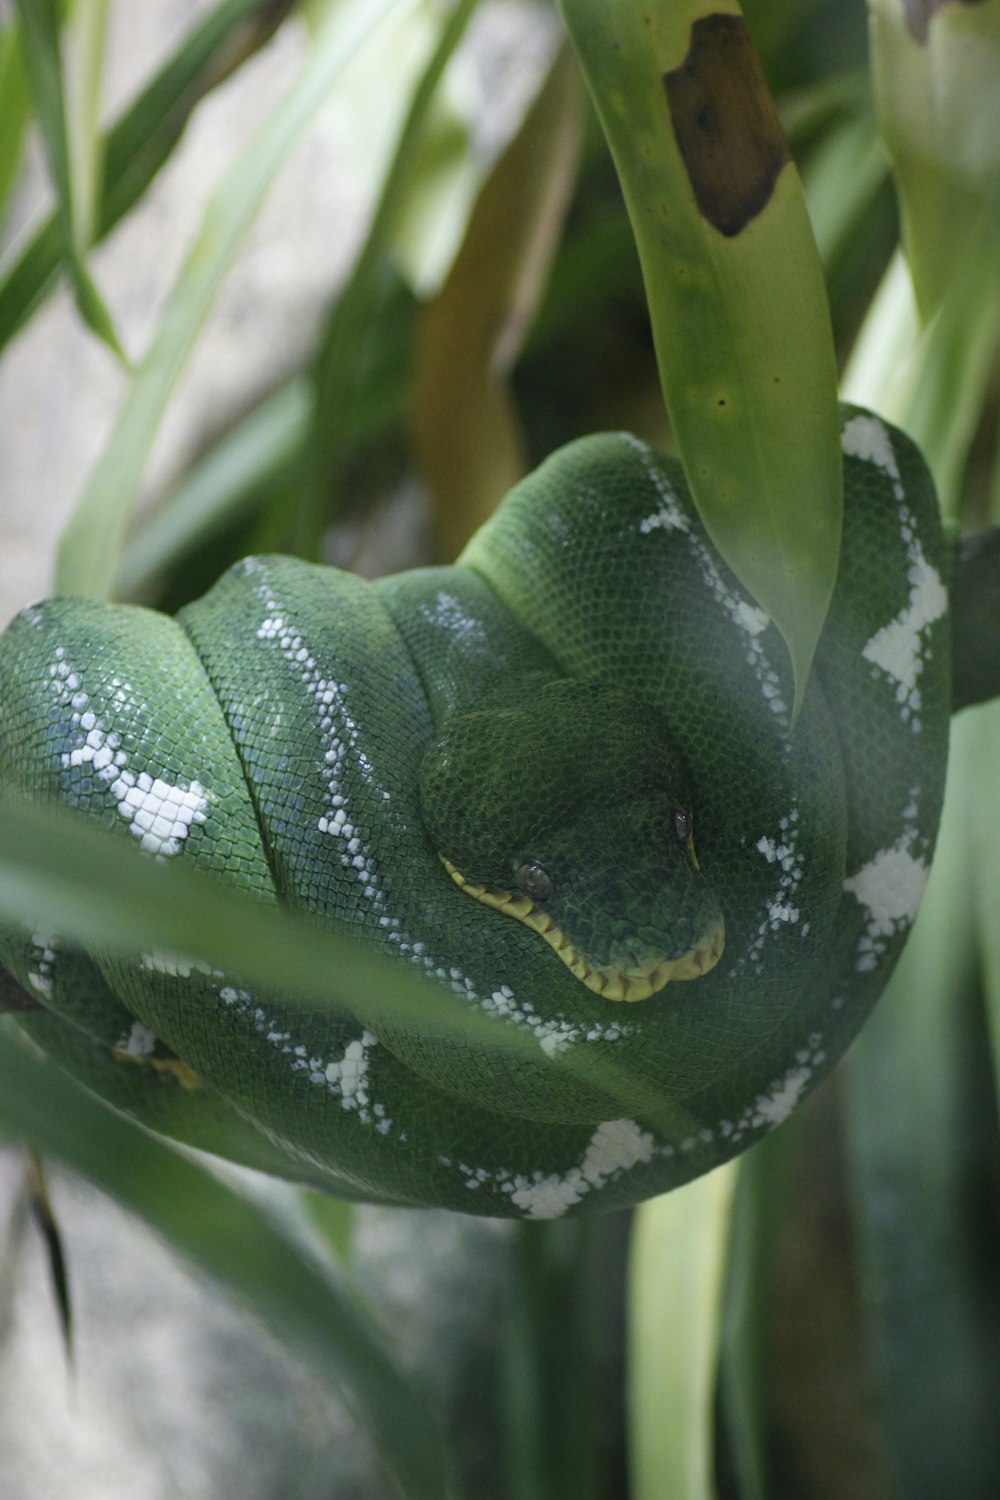 a green snake is curled up on a branch